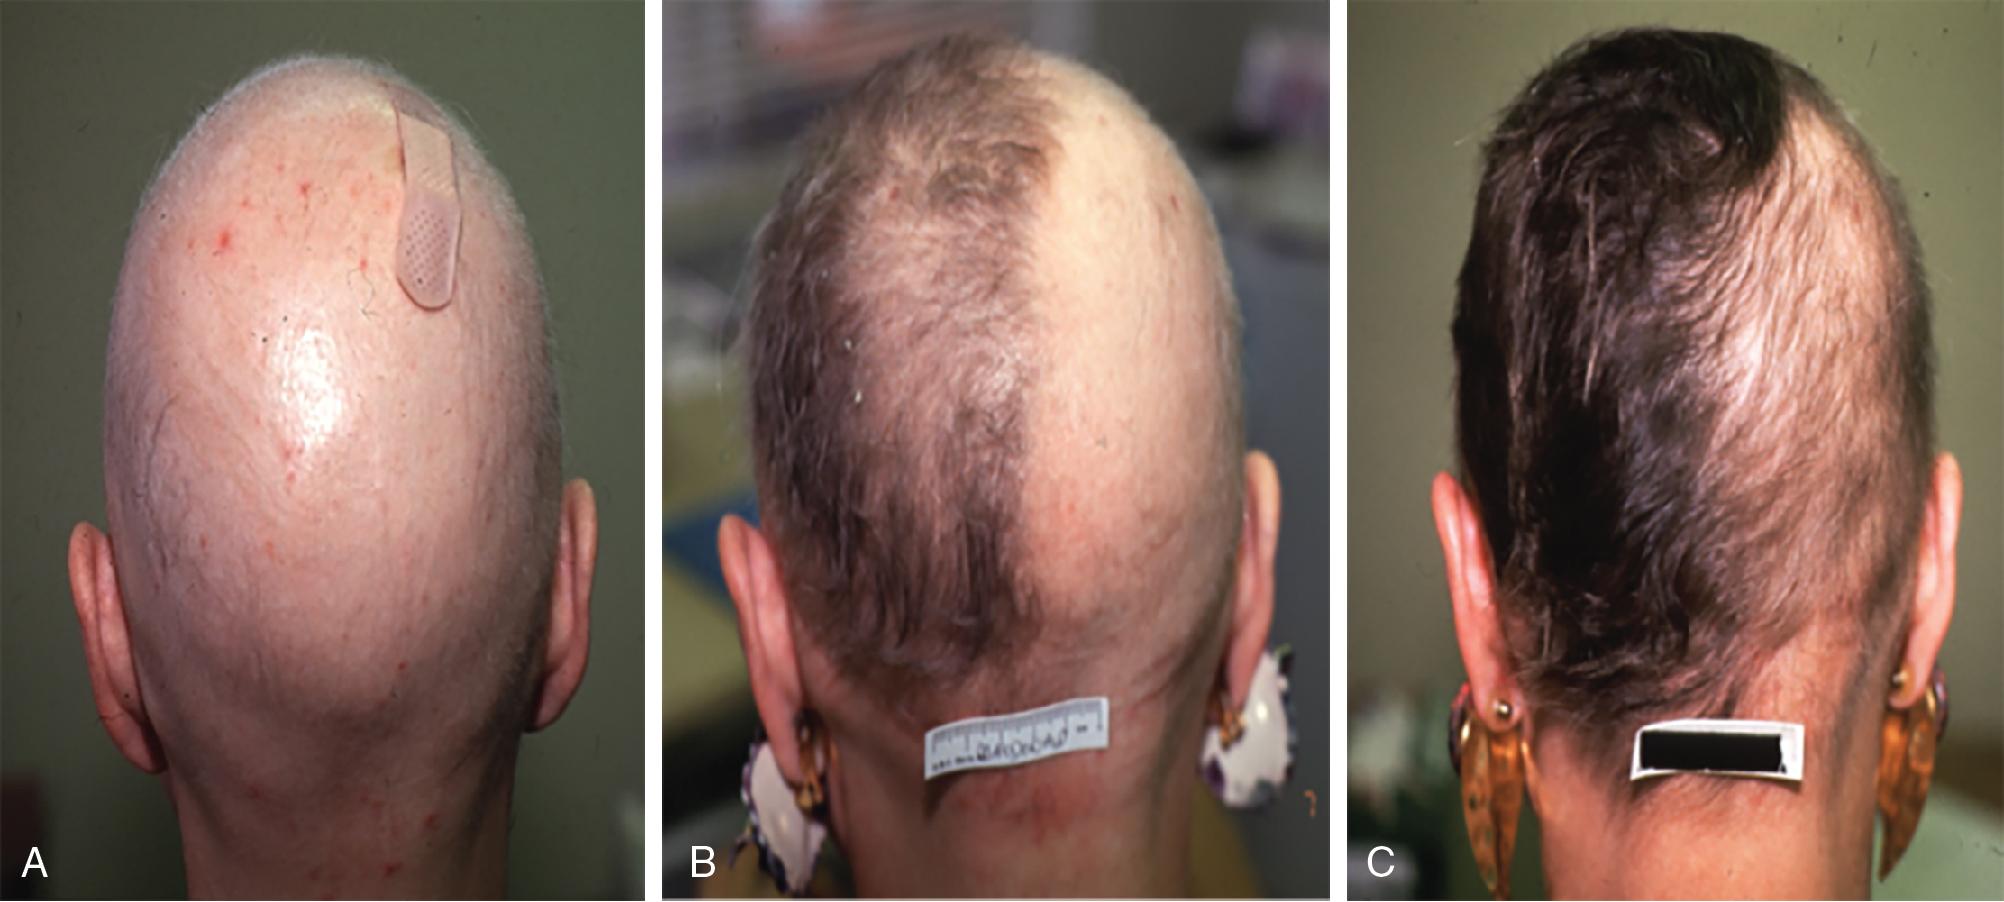 Fig. 9.1, (A) Patient with alopecia areata prior to treatment with topical immunotherapy. (B) Four months after treatment of alopecia areata with topical immunotherapy. (C) Seven months after treatment of alopecia areata with topical immunotherapy.